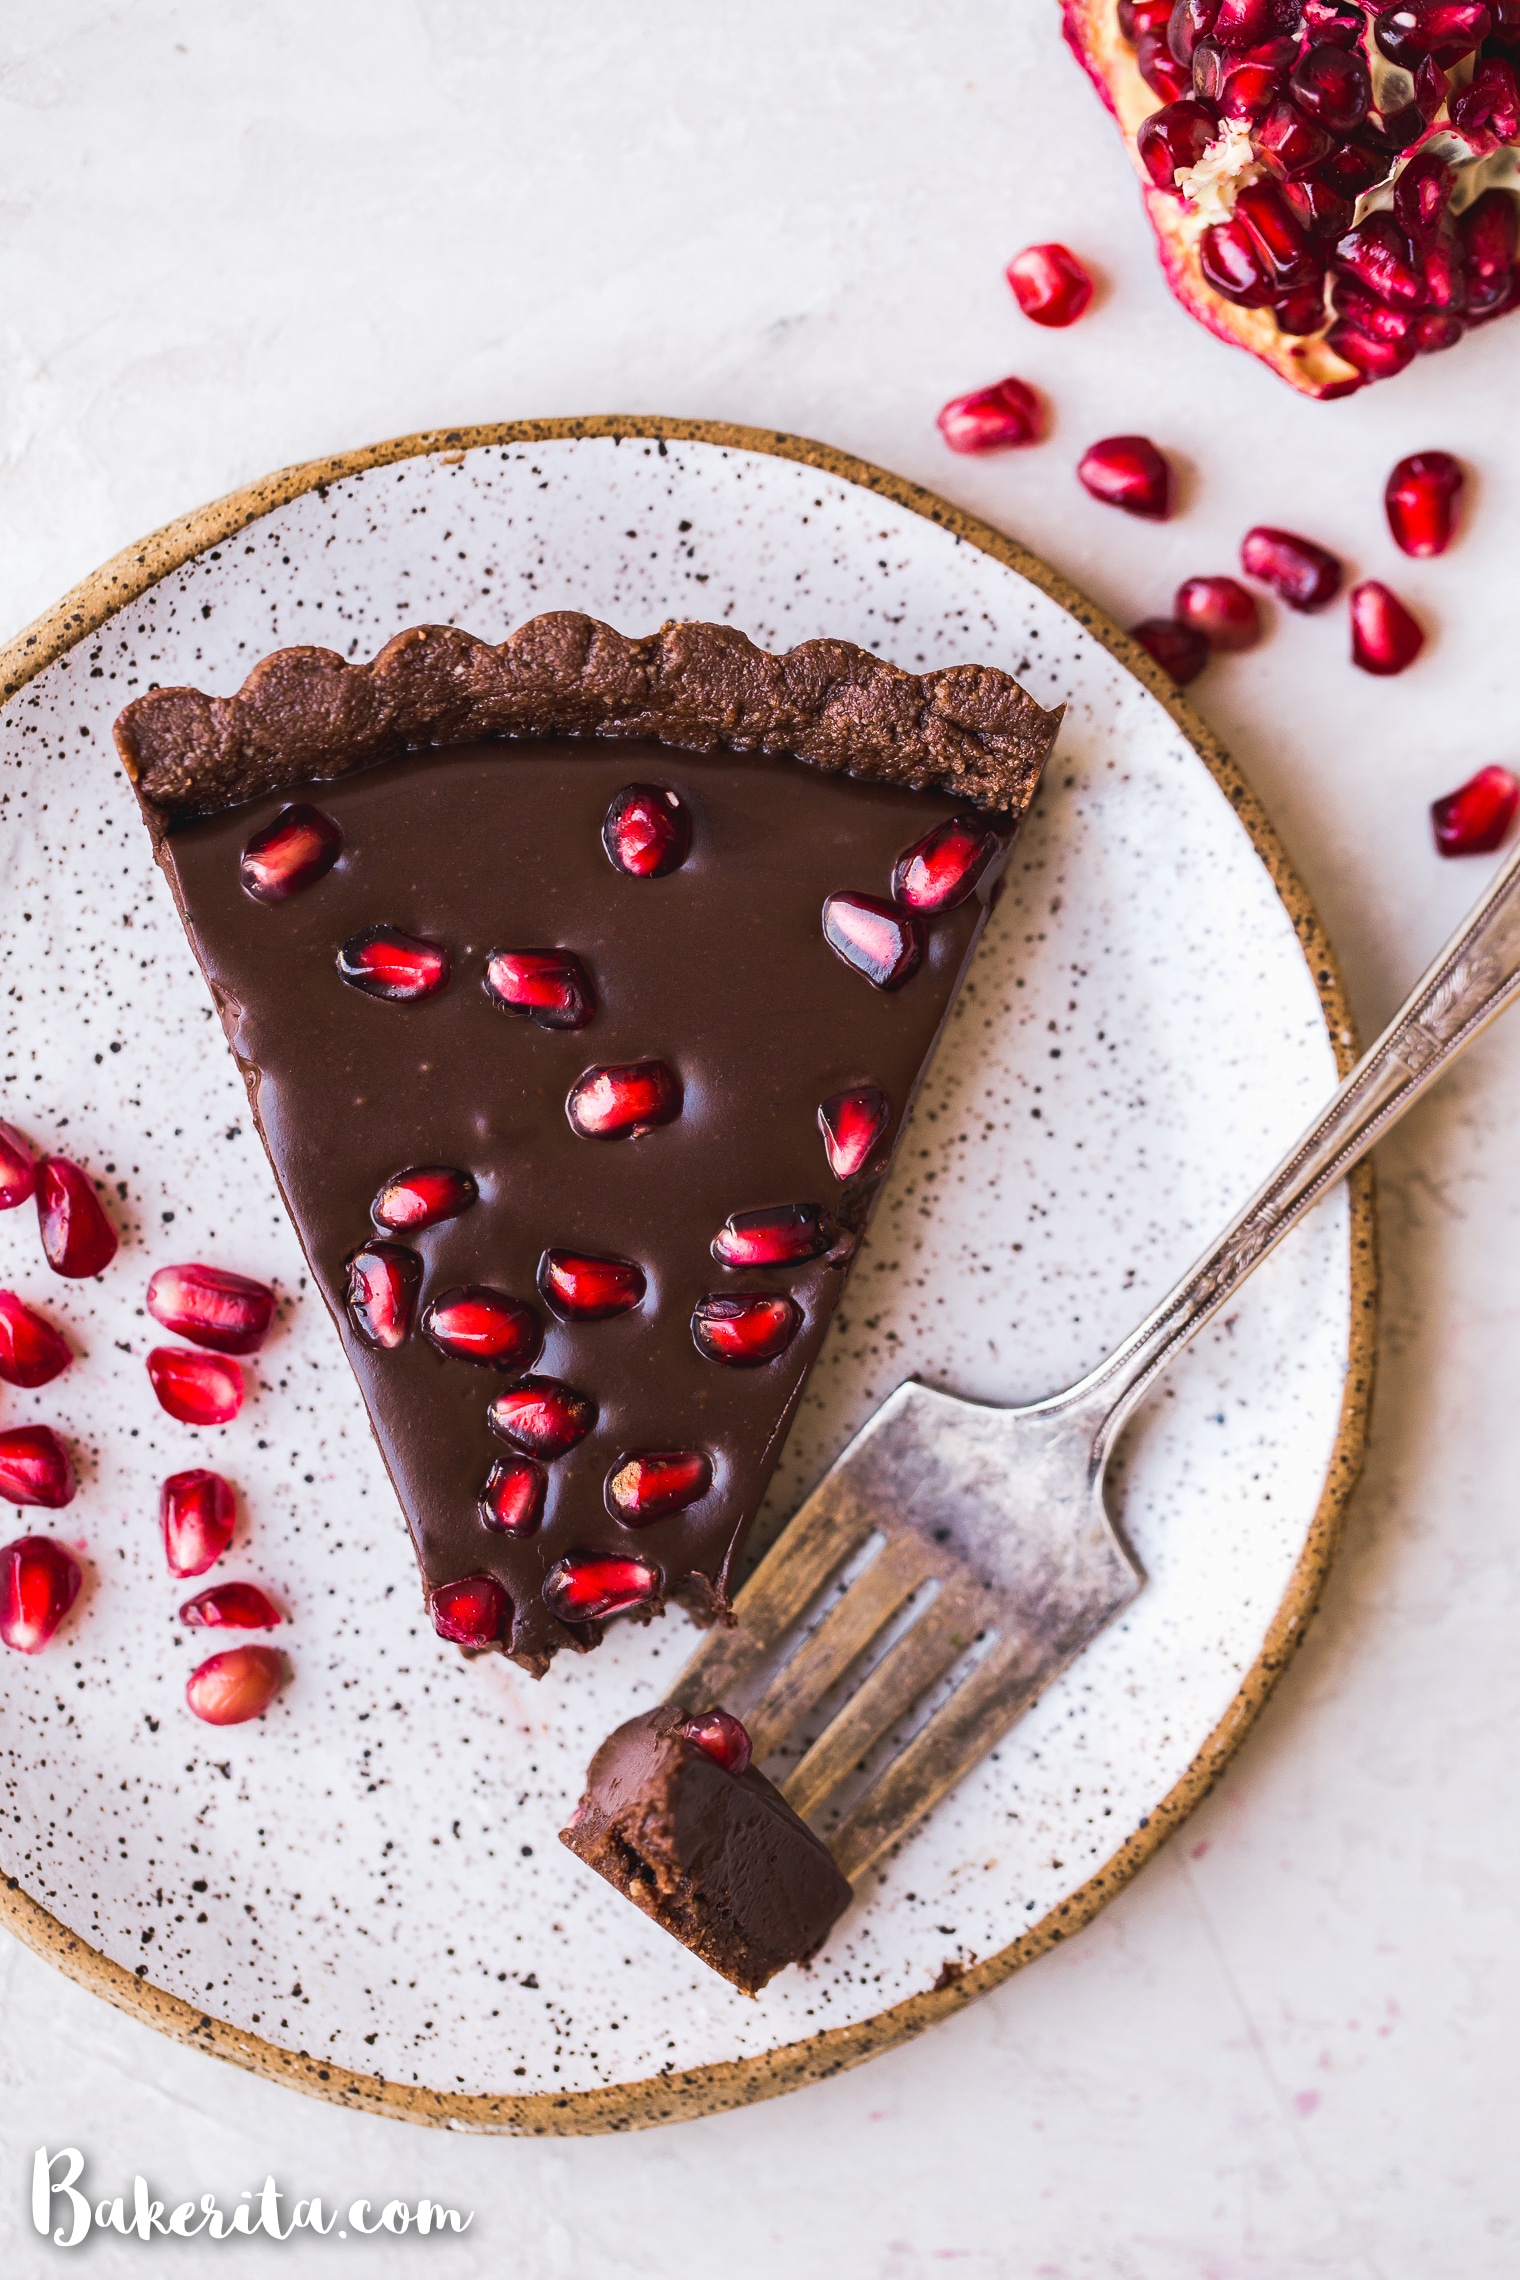 This No-Bake Chocolate Pomegranate Tart is made with 8 simple ingredients and is perfect for holiday entertaining! No baking required for this gluten-free, paleo, and vegan tart.